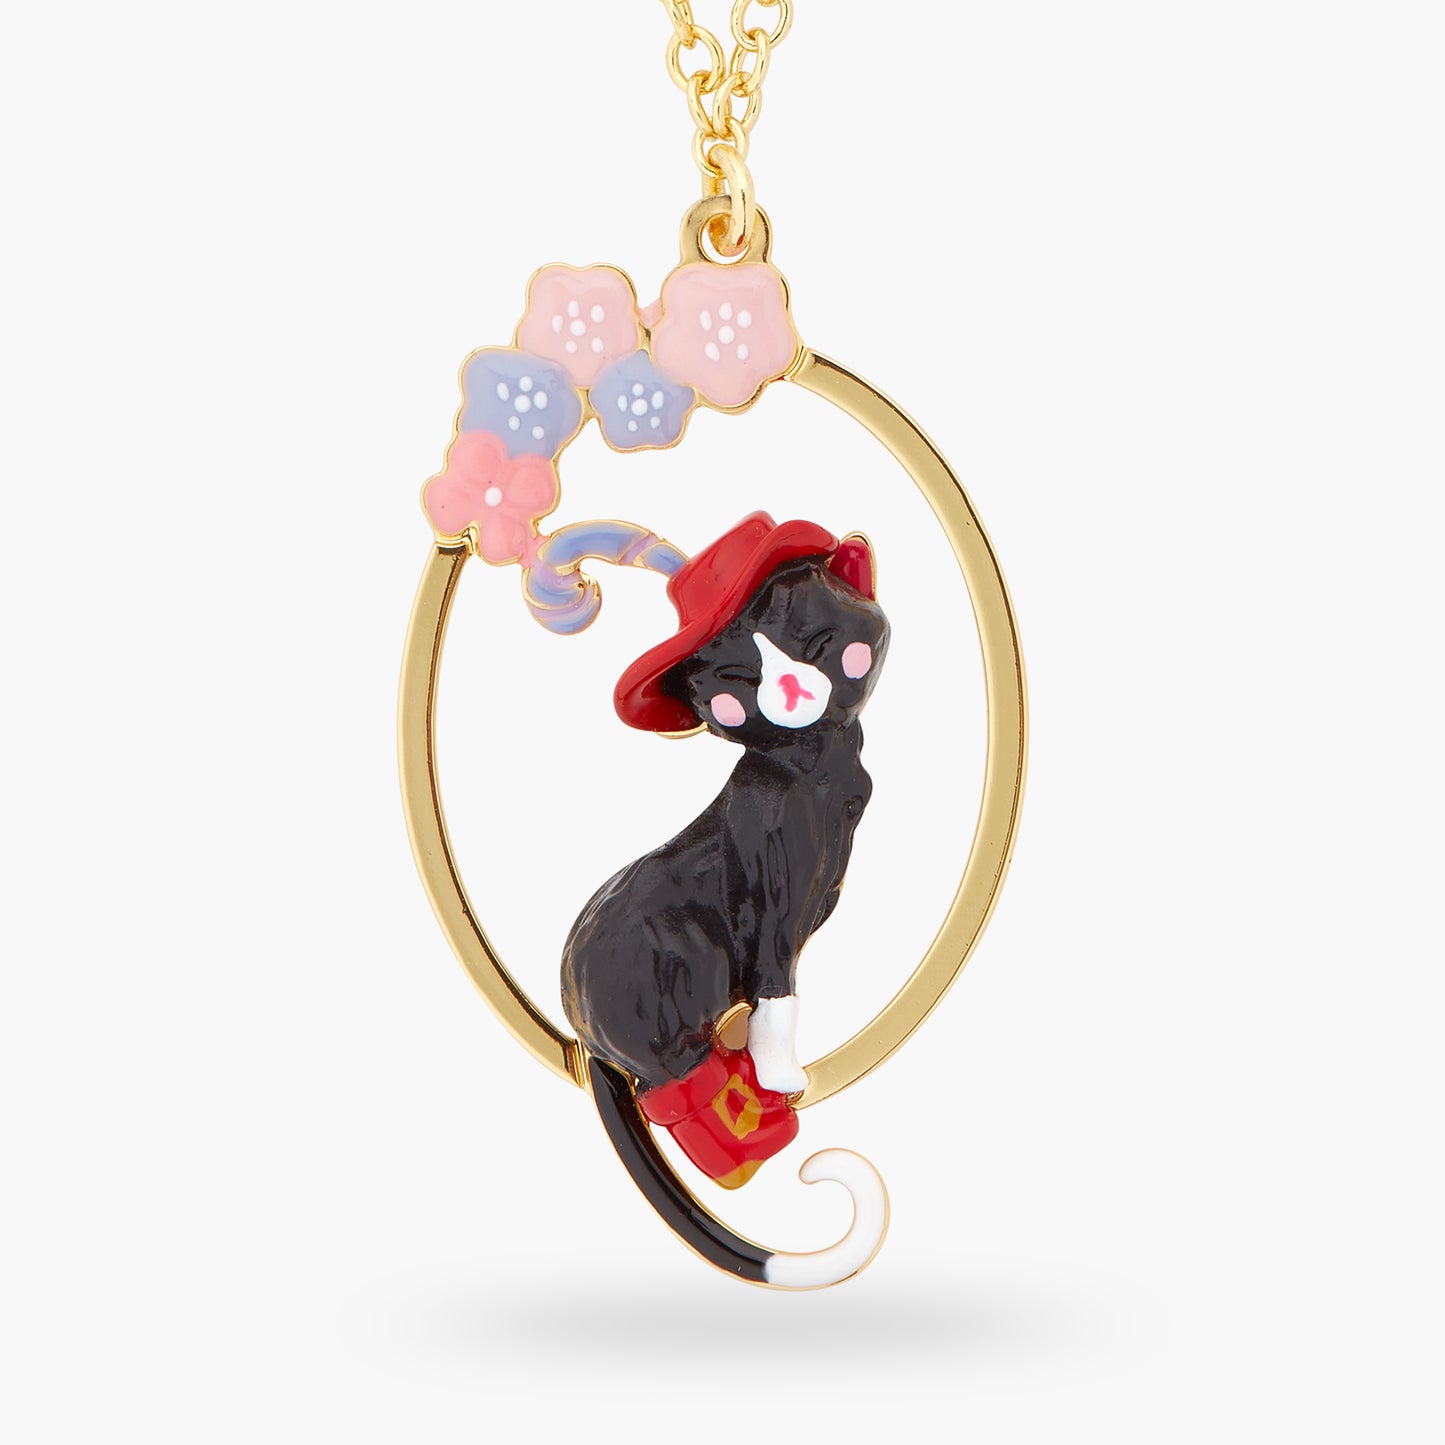 Charming Cat And Flower Pendant Necklace | ASCC3031